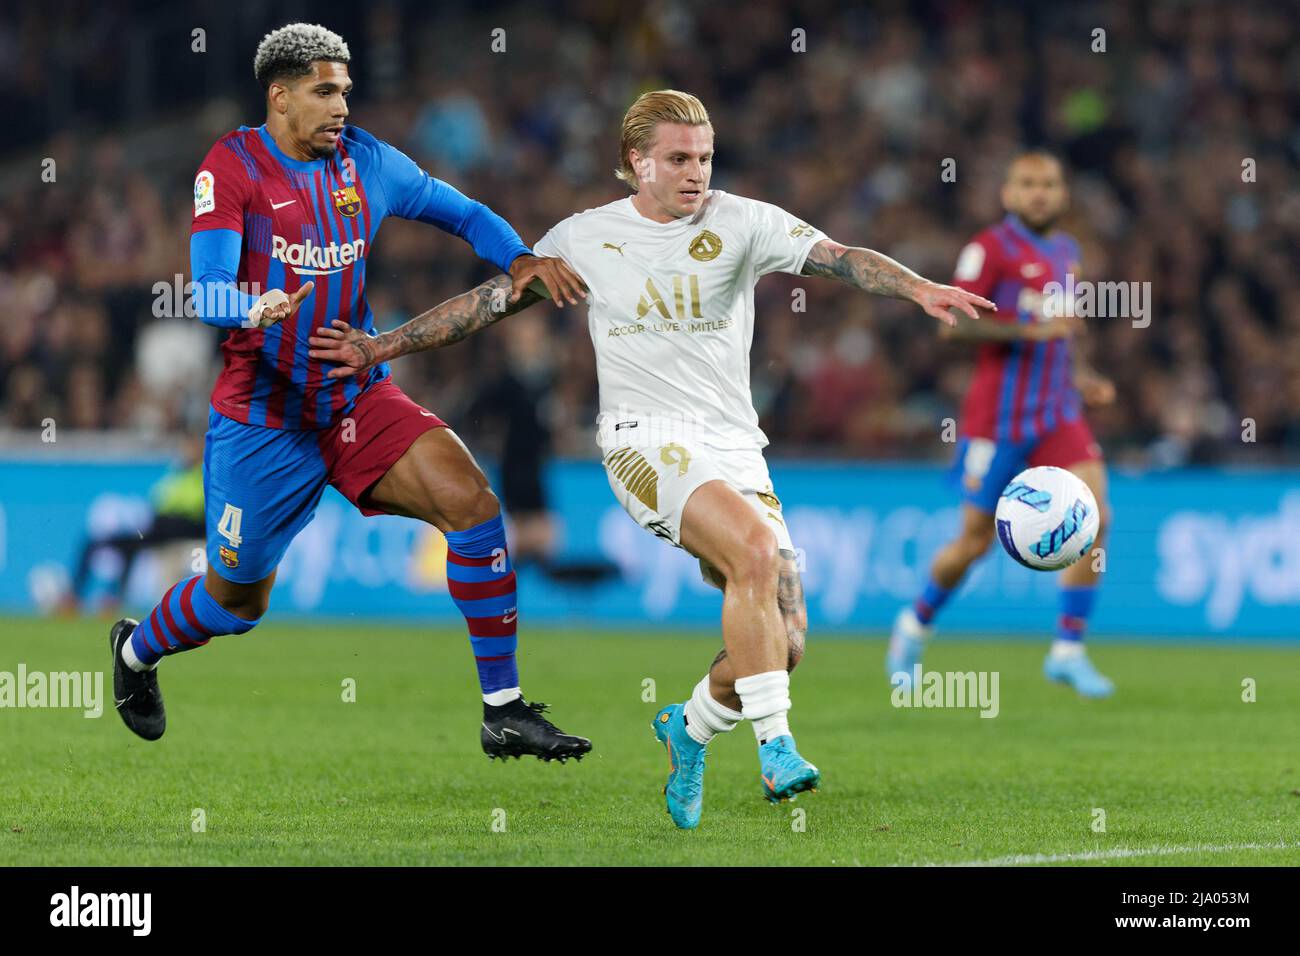 Sydney, Australia. 25th May, 2022. Jason Cummings of the All Stars is challenged by Ronald Araujo of FC Barcelona during the match between FC Barcelona and the A-League All Stars at Accor Stadium on May 25, 2022 in Sydney, Australia Credit: IOIO IMAGES/Alamy Live News Stock Photo